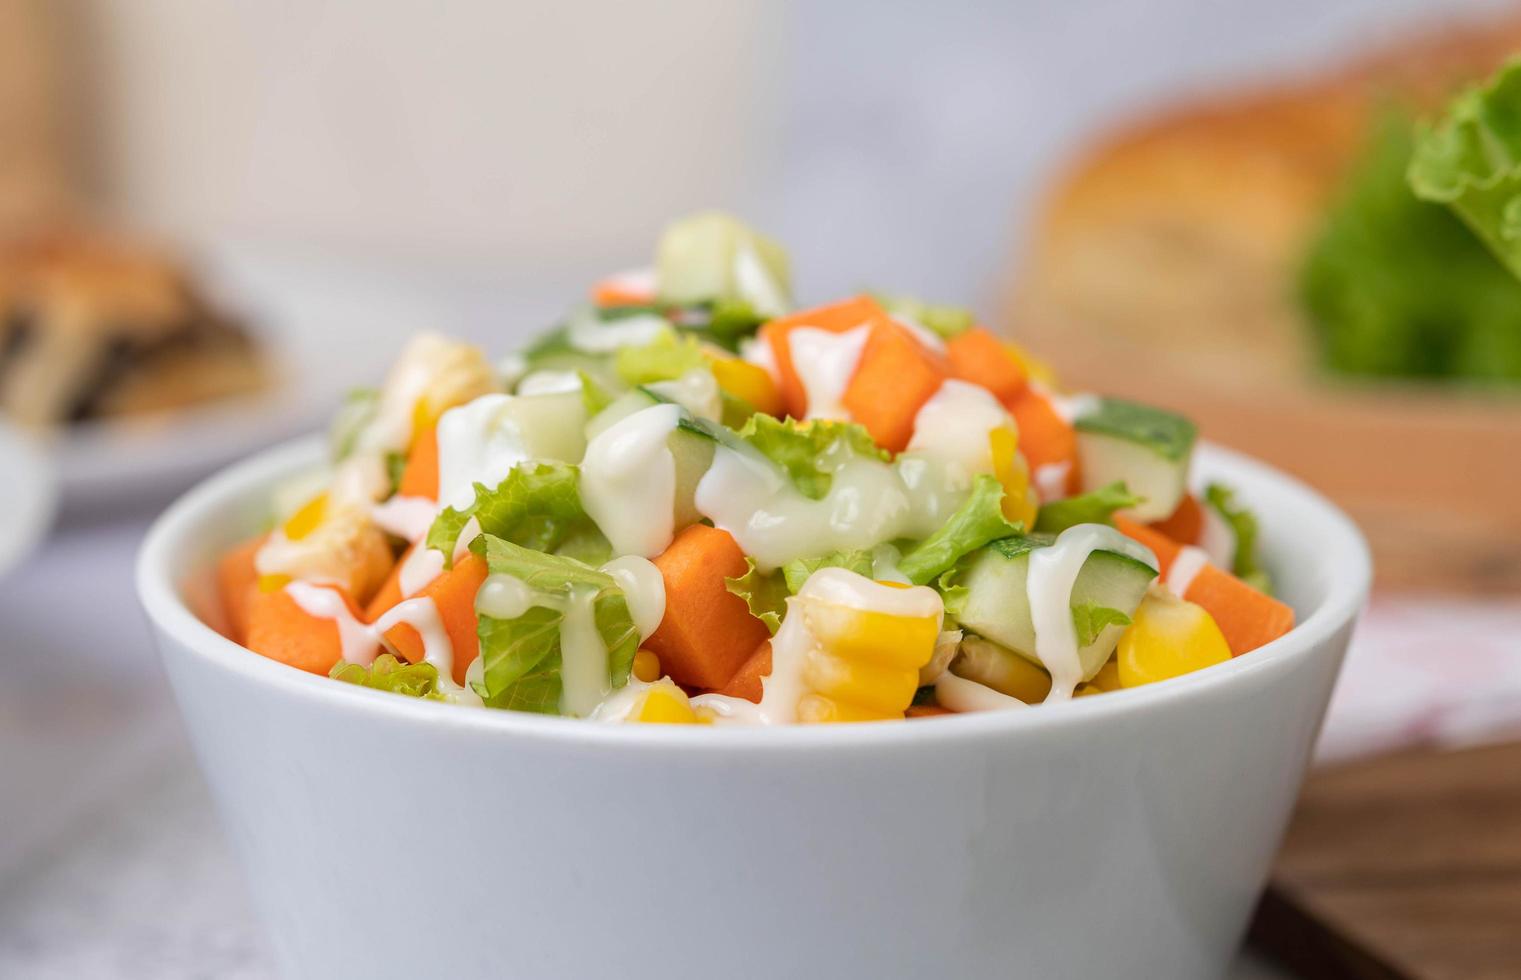 Cucumber, corn, carrot and lettuce salad photo